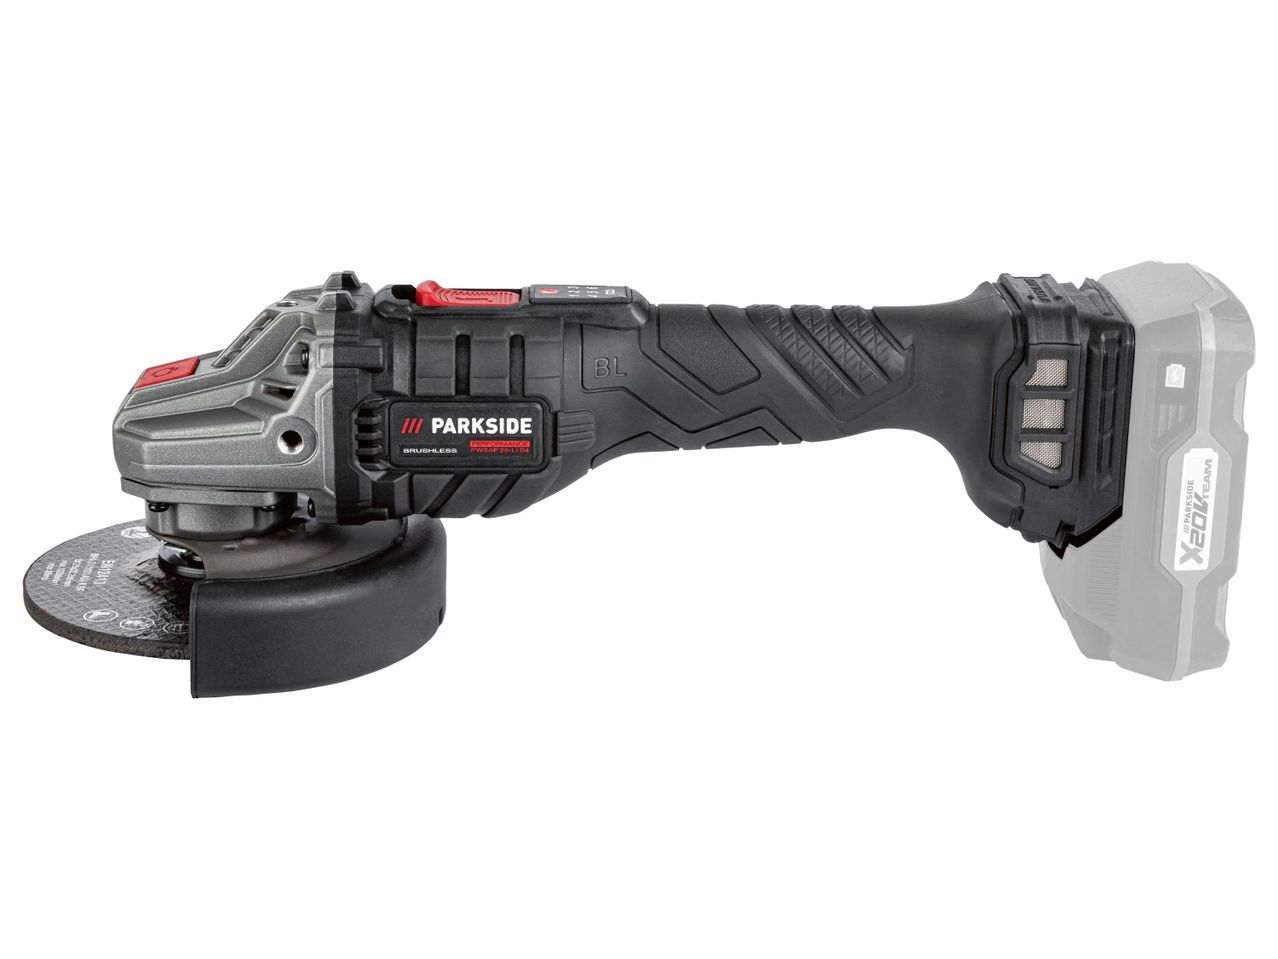 Go to full screen view: Cordless Angle Grinder - Image 1